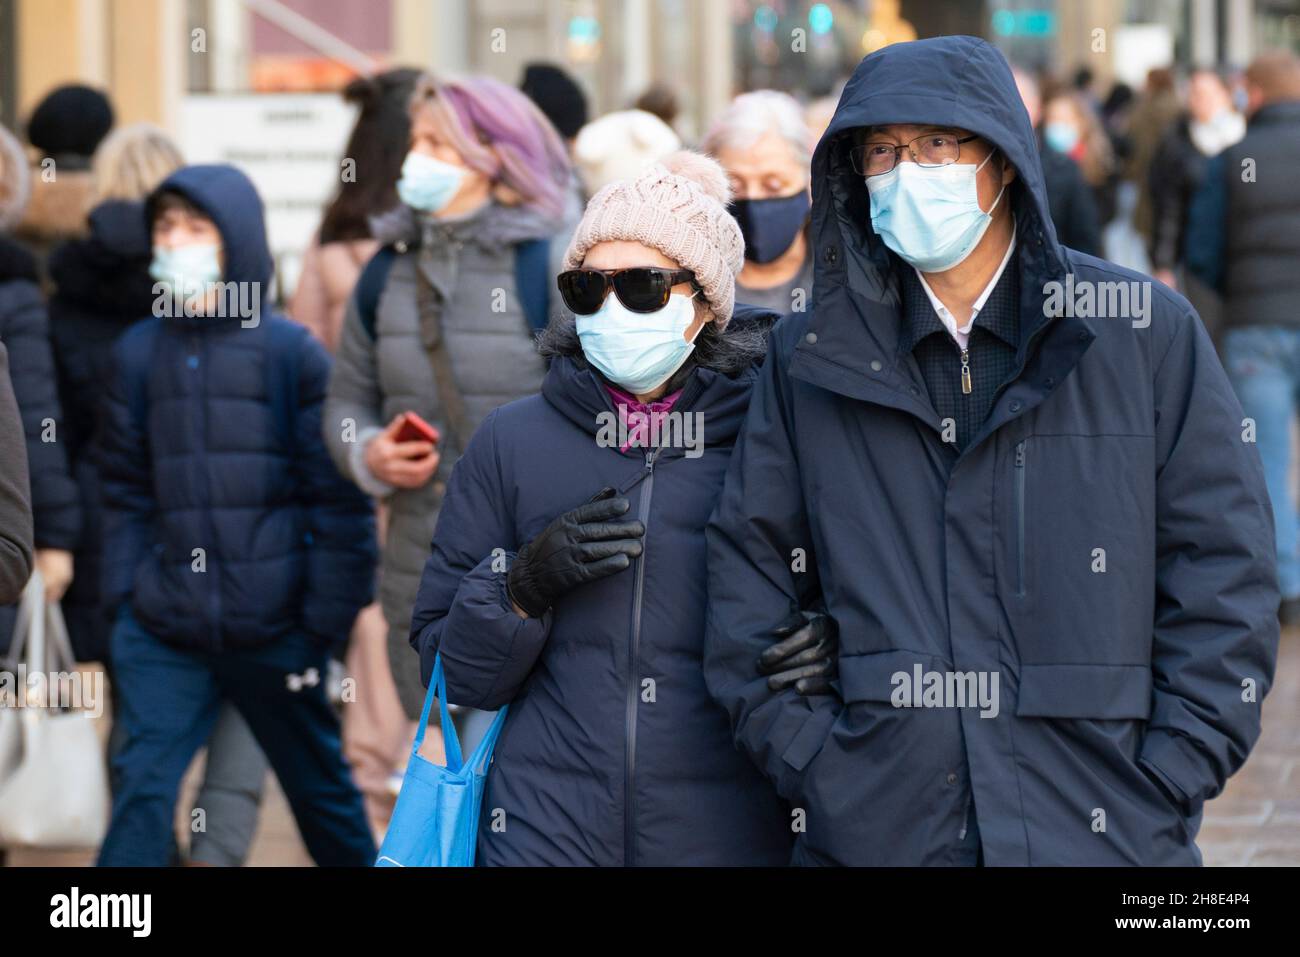 Edinburgh, Scotland, UK. 29th November  2021. Many members of the public wearing face masks outdoor on Princes Street in Edinburgh. With the new Omicron variant of Coronavirus now in Scotland the public have been urged to wear face masks as much as possible to minimise spread of the new virus  variant. Iain Masterton/Alamy Live News. Stock Photo